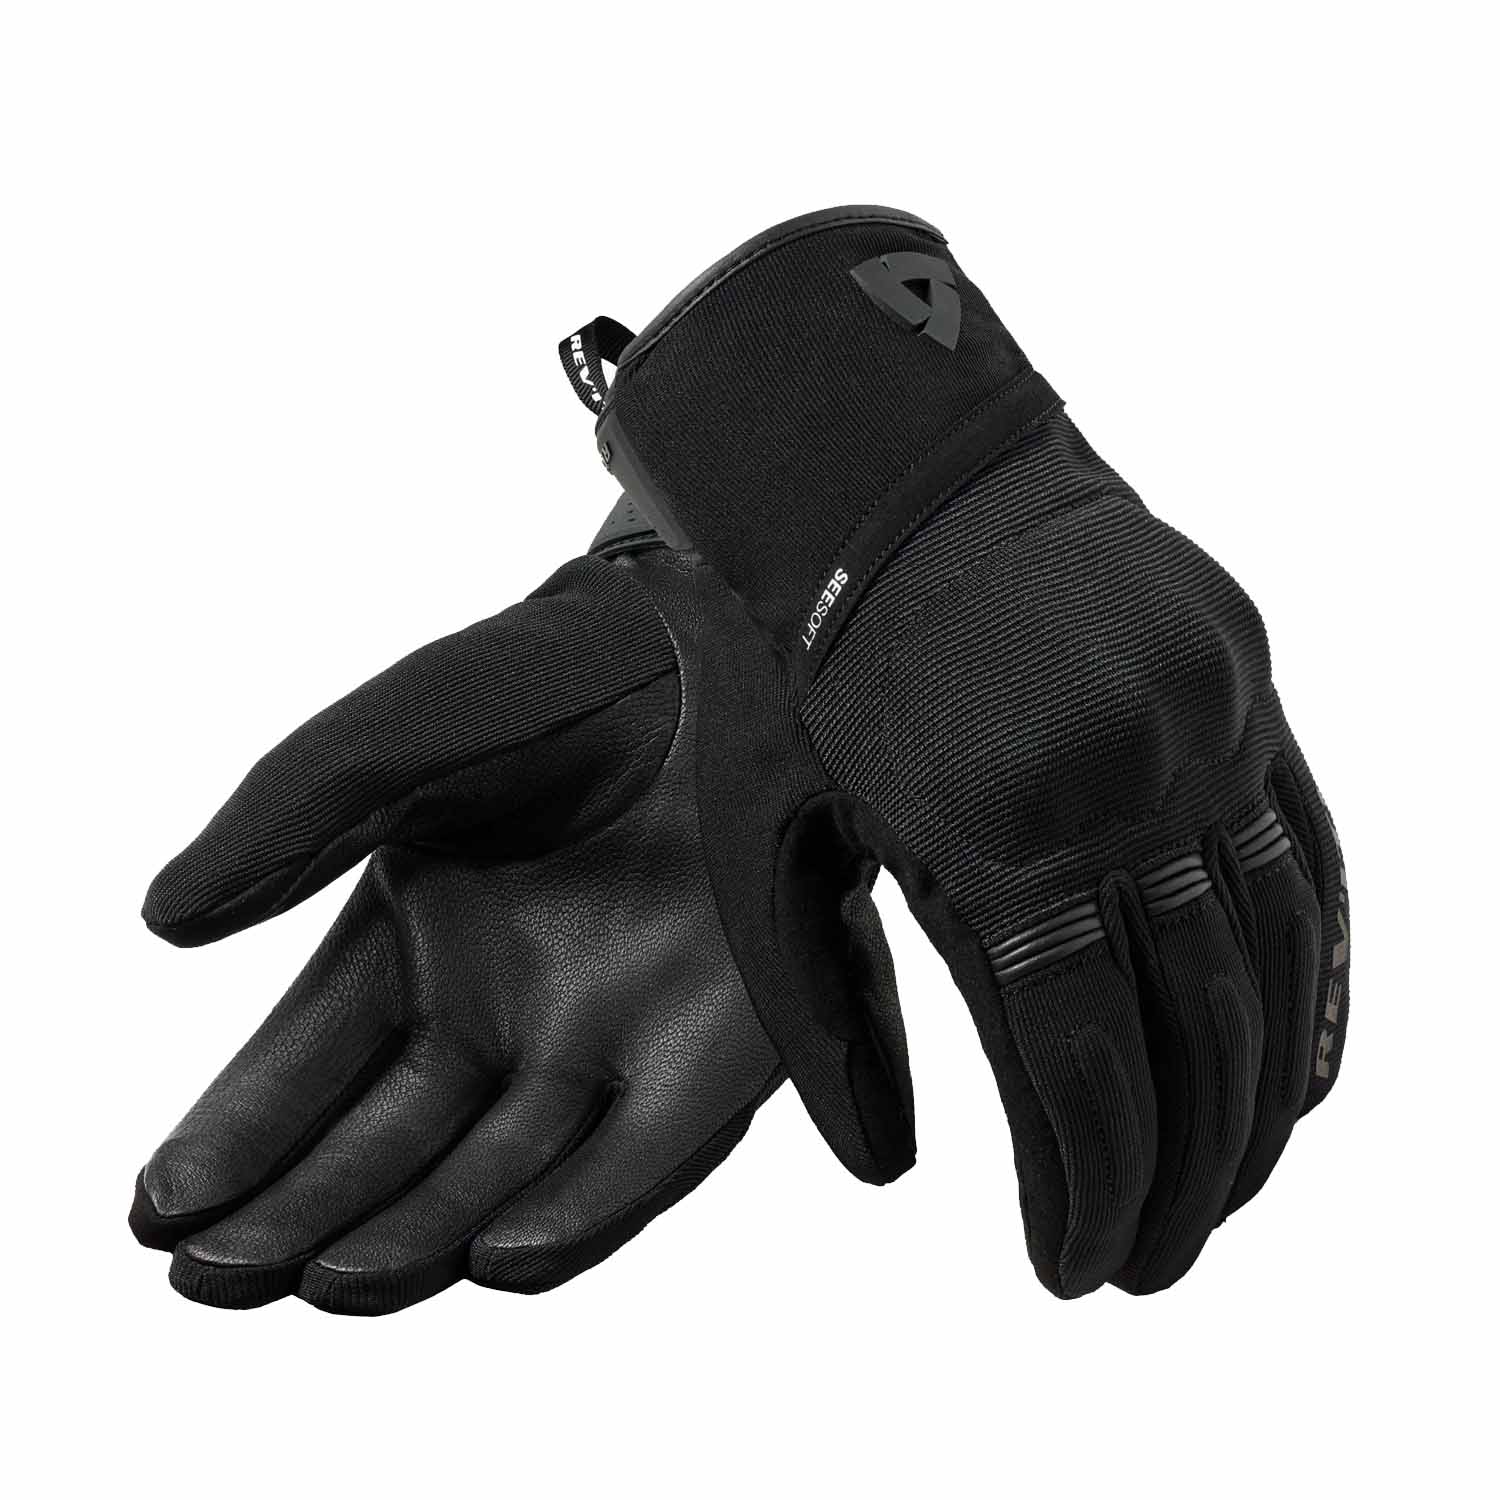 Image of EU REV'IT! Mosca 2 H2O Gloves Black Taille 4XL